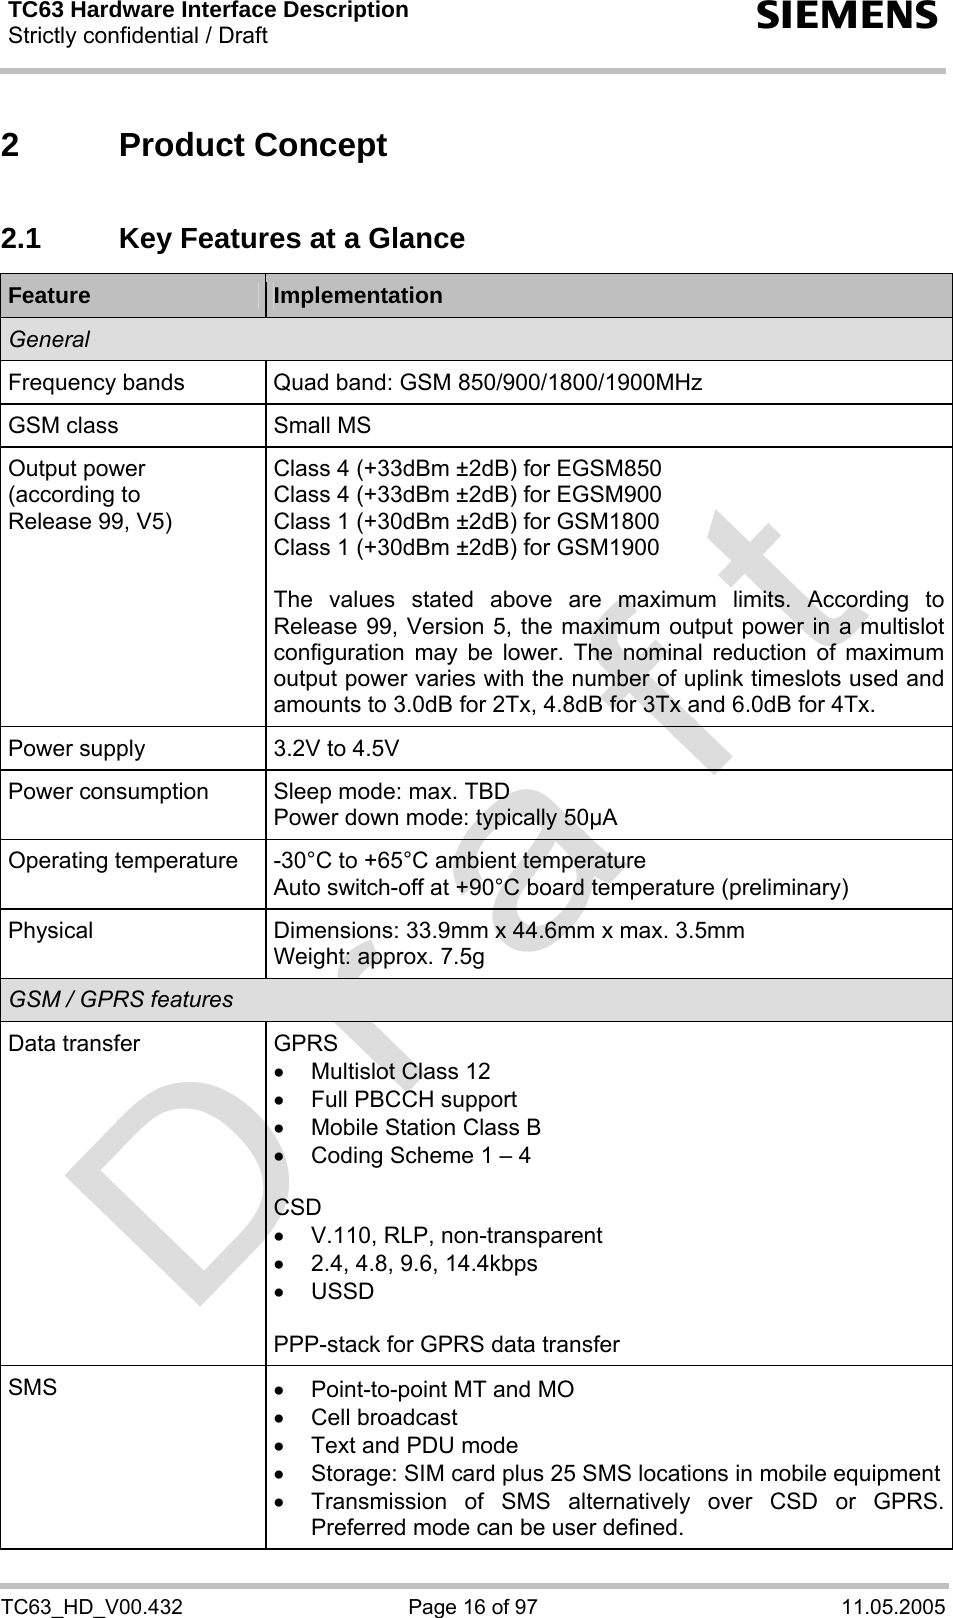 TC63 Hardware Interface Description Strictly confidential / Draft  s TC63_HD_V00.432  Page 16 of 97  11.05.2005 2 Product Concept 2.1  Key Features at a Glance Feature  Implementation General Frequency bands  Quad band: GSM 850/900/1800/1900MHz GSM class  Small MS Output power (according to  Release 99, V5) Class 4 (+33dBm ±2dB) for EGSM850 Class 4 (+33dBm ±2dB) for EGSM900 Class 1 (+30dBm ±2dB) for GSM1800 Class 1 (+30dBm ±2dB) for GSM1900  The values stated above are maximum limits. According to Release 99, Version 5, the maximum output power in a multislot configuration may be lower. The nominal reduction of maximum output power varies with the number of uplink timeslots used and amounts to 3.0dB for 2Tx, 4.8dB for 3Tx and 6.0dB for 4Tx. Power supply  3.2V to 4.5V Power consumption  Sleep mode: max. TBD Power down mode: typically 50µA Operating temperature  -30°C to +65°C ambient temperature Auto switch-off at +90°C board temperature (preliminary) Physical Dimensions: 33.9mm x 44.6mm x max. 3.5mm Weight: approx. 7.5g GSM / GPRS features Data transfer  GPRS •  Multislot Class 12 •  Full PBCCH support •  Mobile Station Class B •  Coding Scheme 1 – 4  CSD •  V.110, RLP, non-transparent •  2.4, 4.8, 9.6, 14.4kbps • USSD  PPP-stack for GPRS data transfer SMS  •  Point-to-point MT and MO • Cell broadcast •  Text and PDU mode •  Storage: SIM card plus 25 SMS locations in mobile equipment•  Transmission of SMS alternatively over CSD or GPRS. Preferred mode can be user defined. 